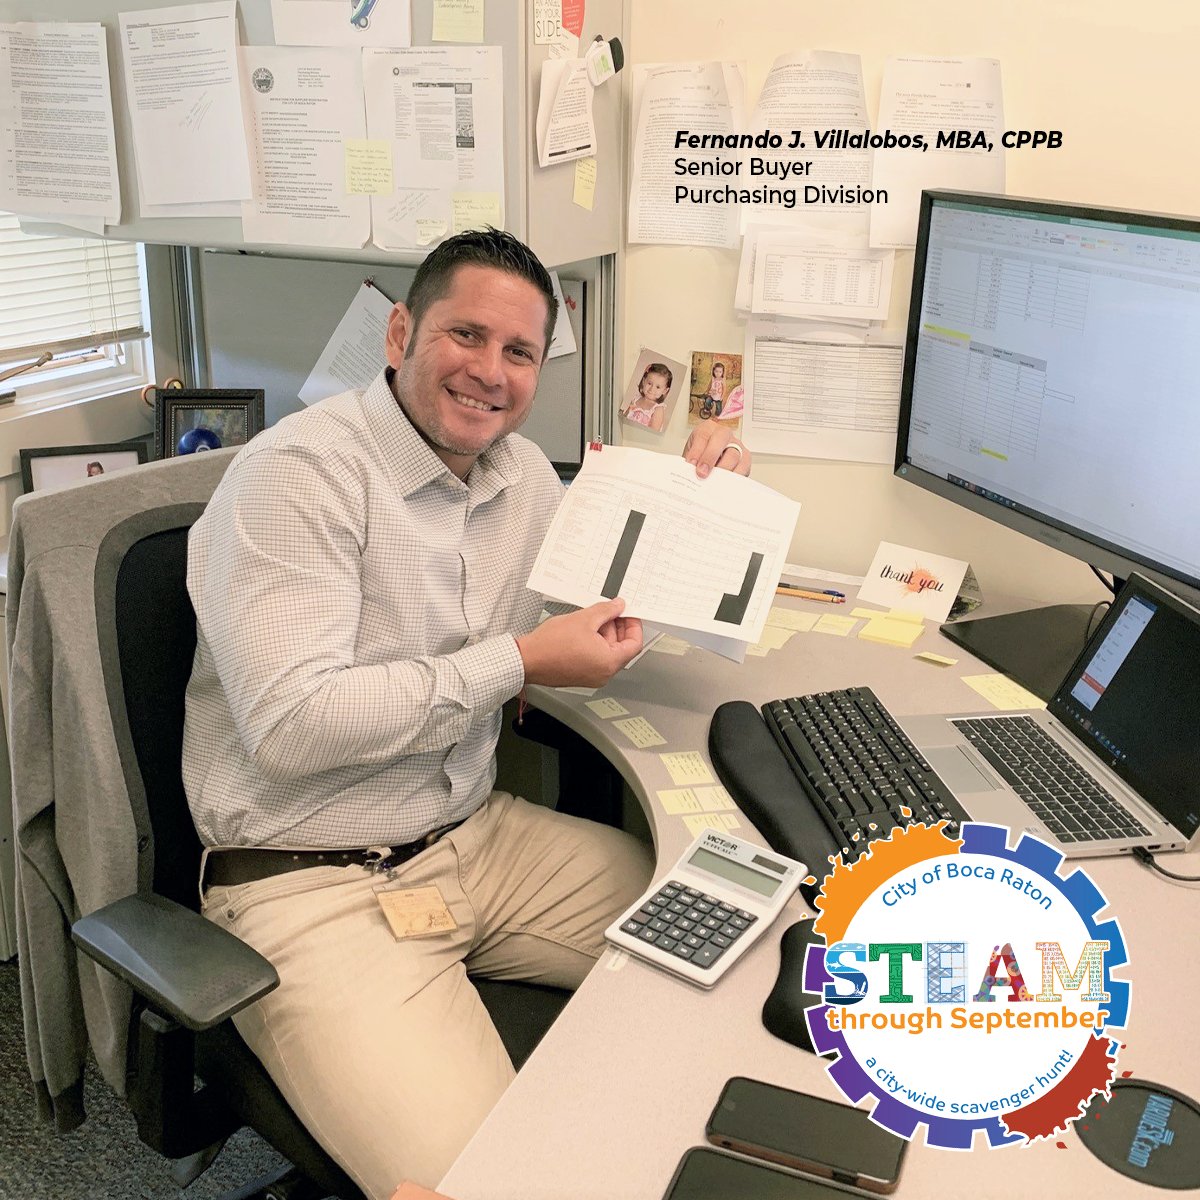 Our last 'STEAM through September' career highlight is MATH with Fernando, a Senior Buyer in our Purchasing Division.

Learn more about Fernando and @BocaRecreation's STEAM through Sept kids' program & scavenger hunt! myboca.us/STEAMJobs

#WeAreCBR #InspiringPublicService